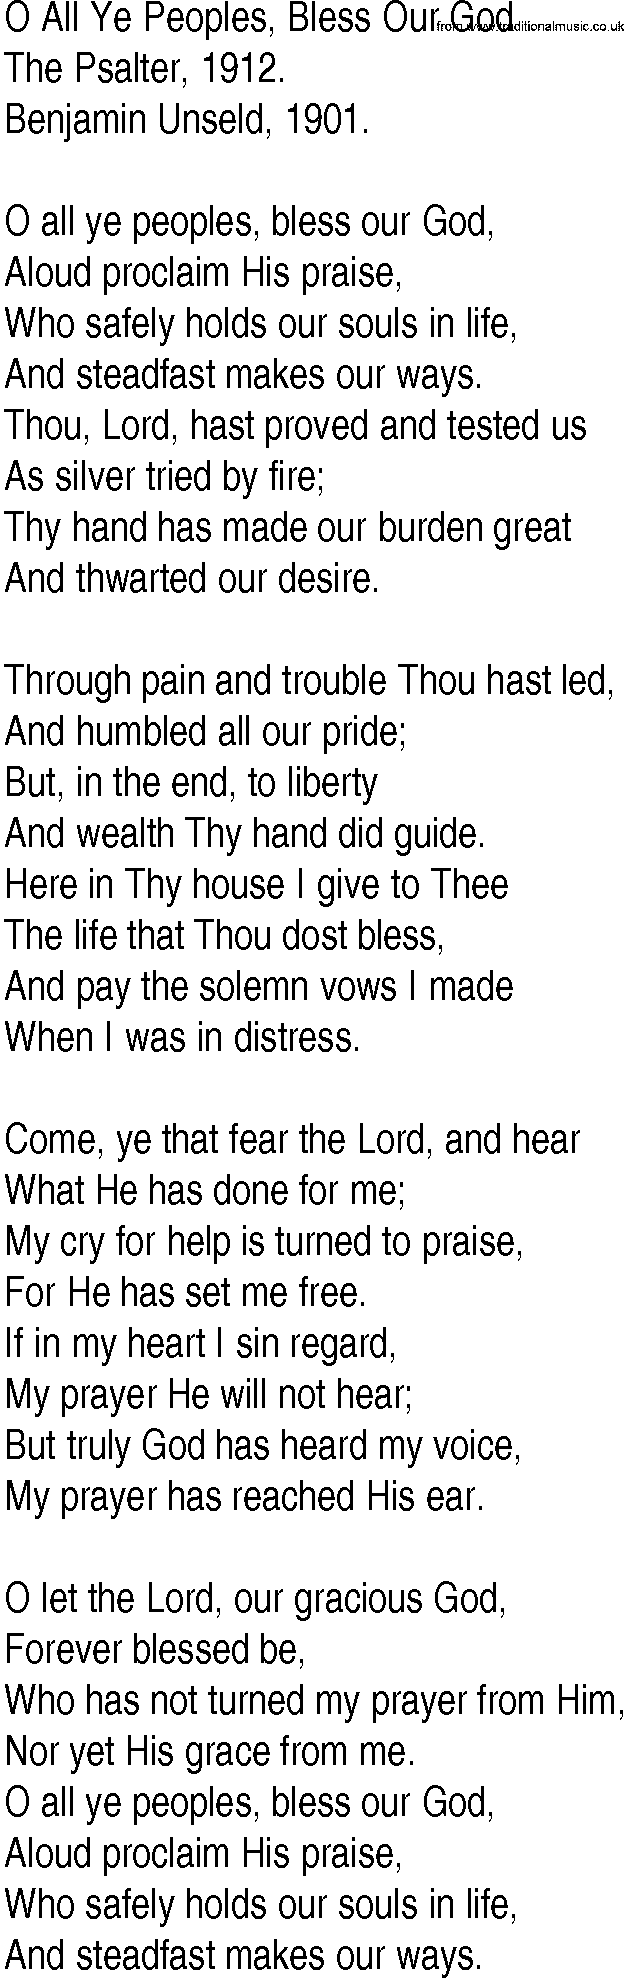 Hymn and Gospel Song: O All Ye Peoples, Bless Our God by The Psalter lyrics